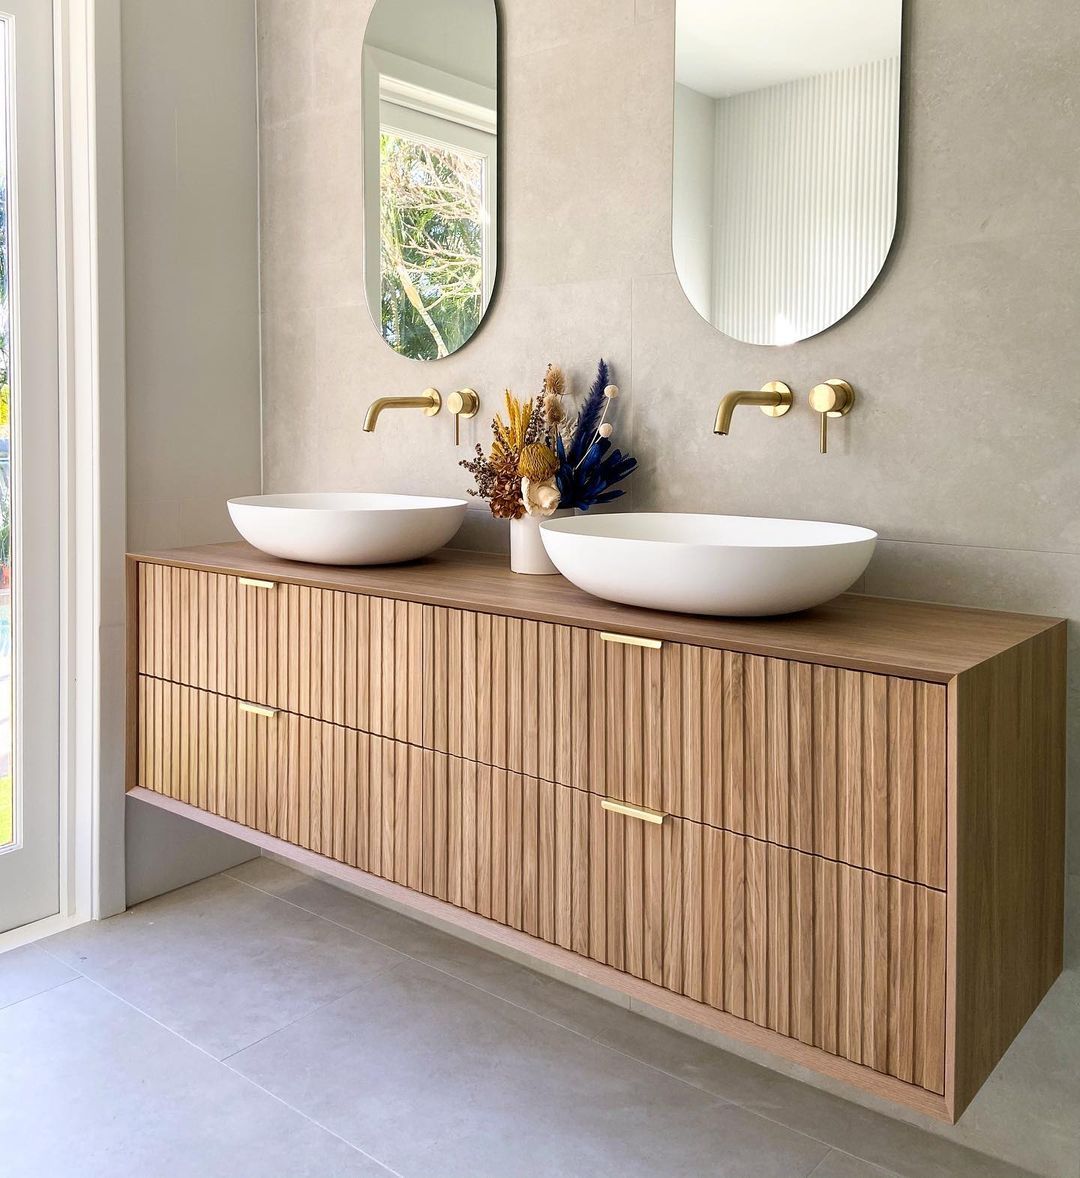 Choosing Vanity Cabinets that Accentuate
Your Bathroom